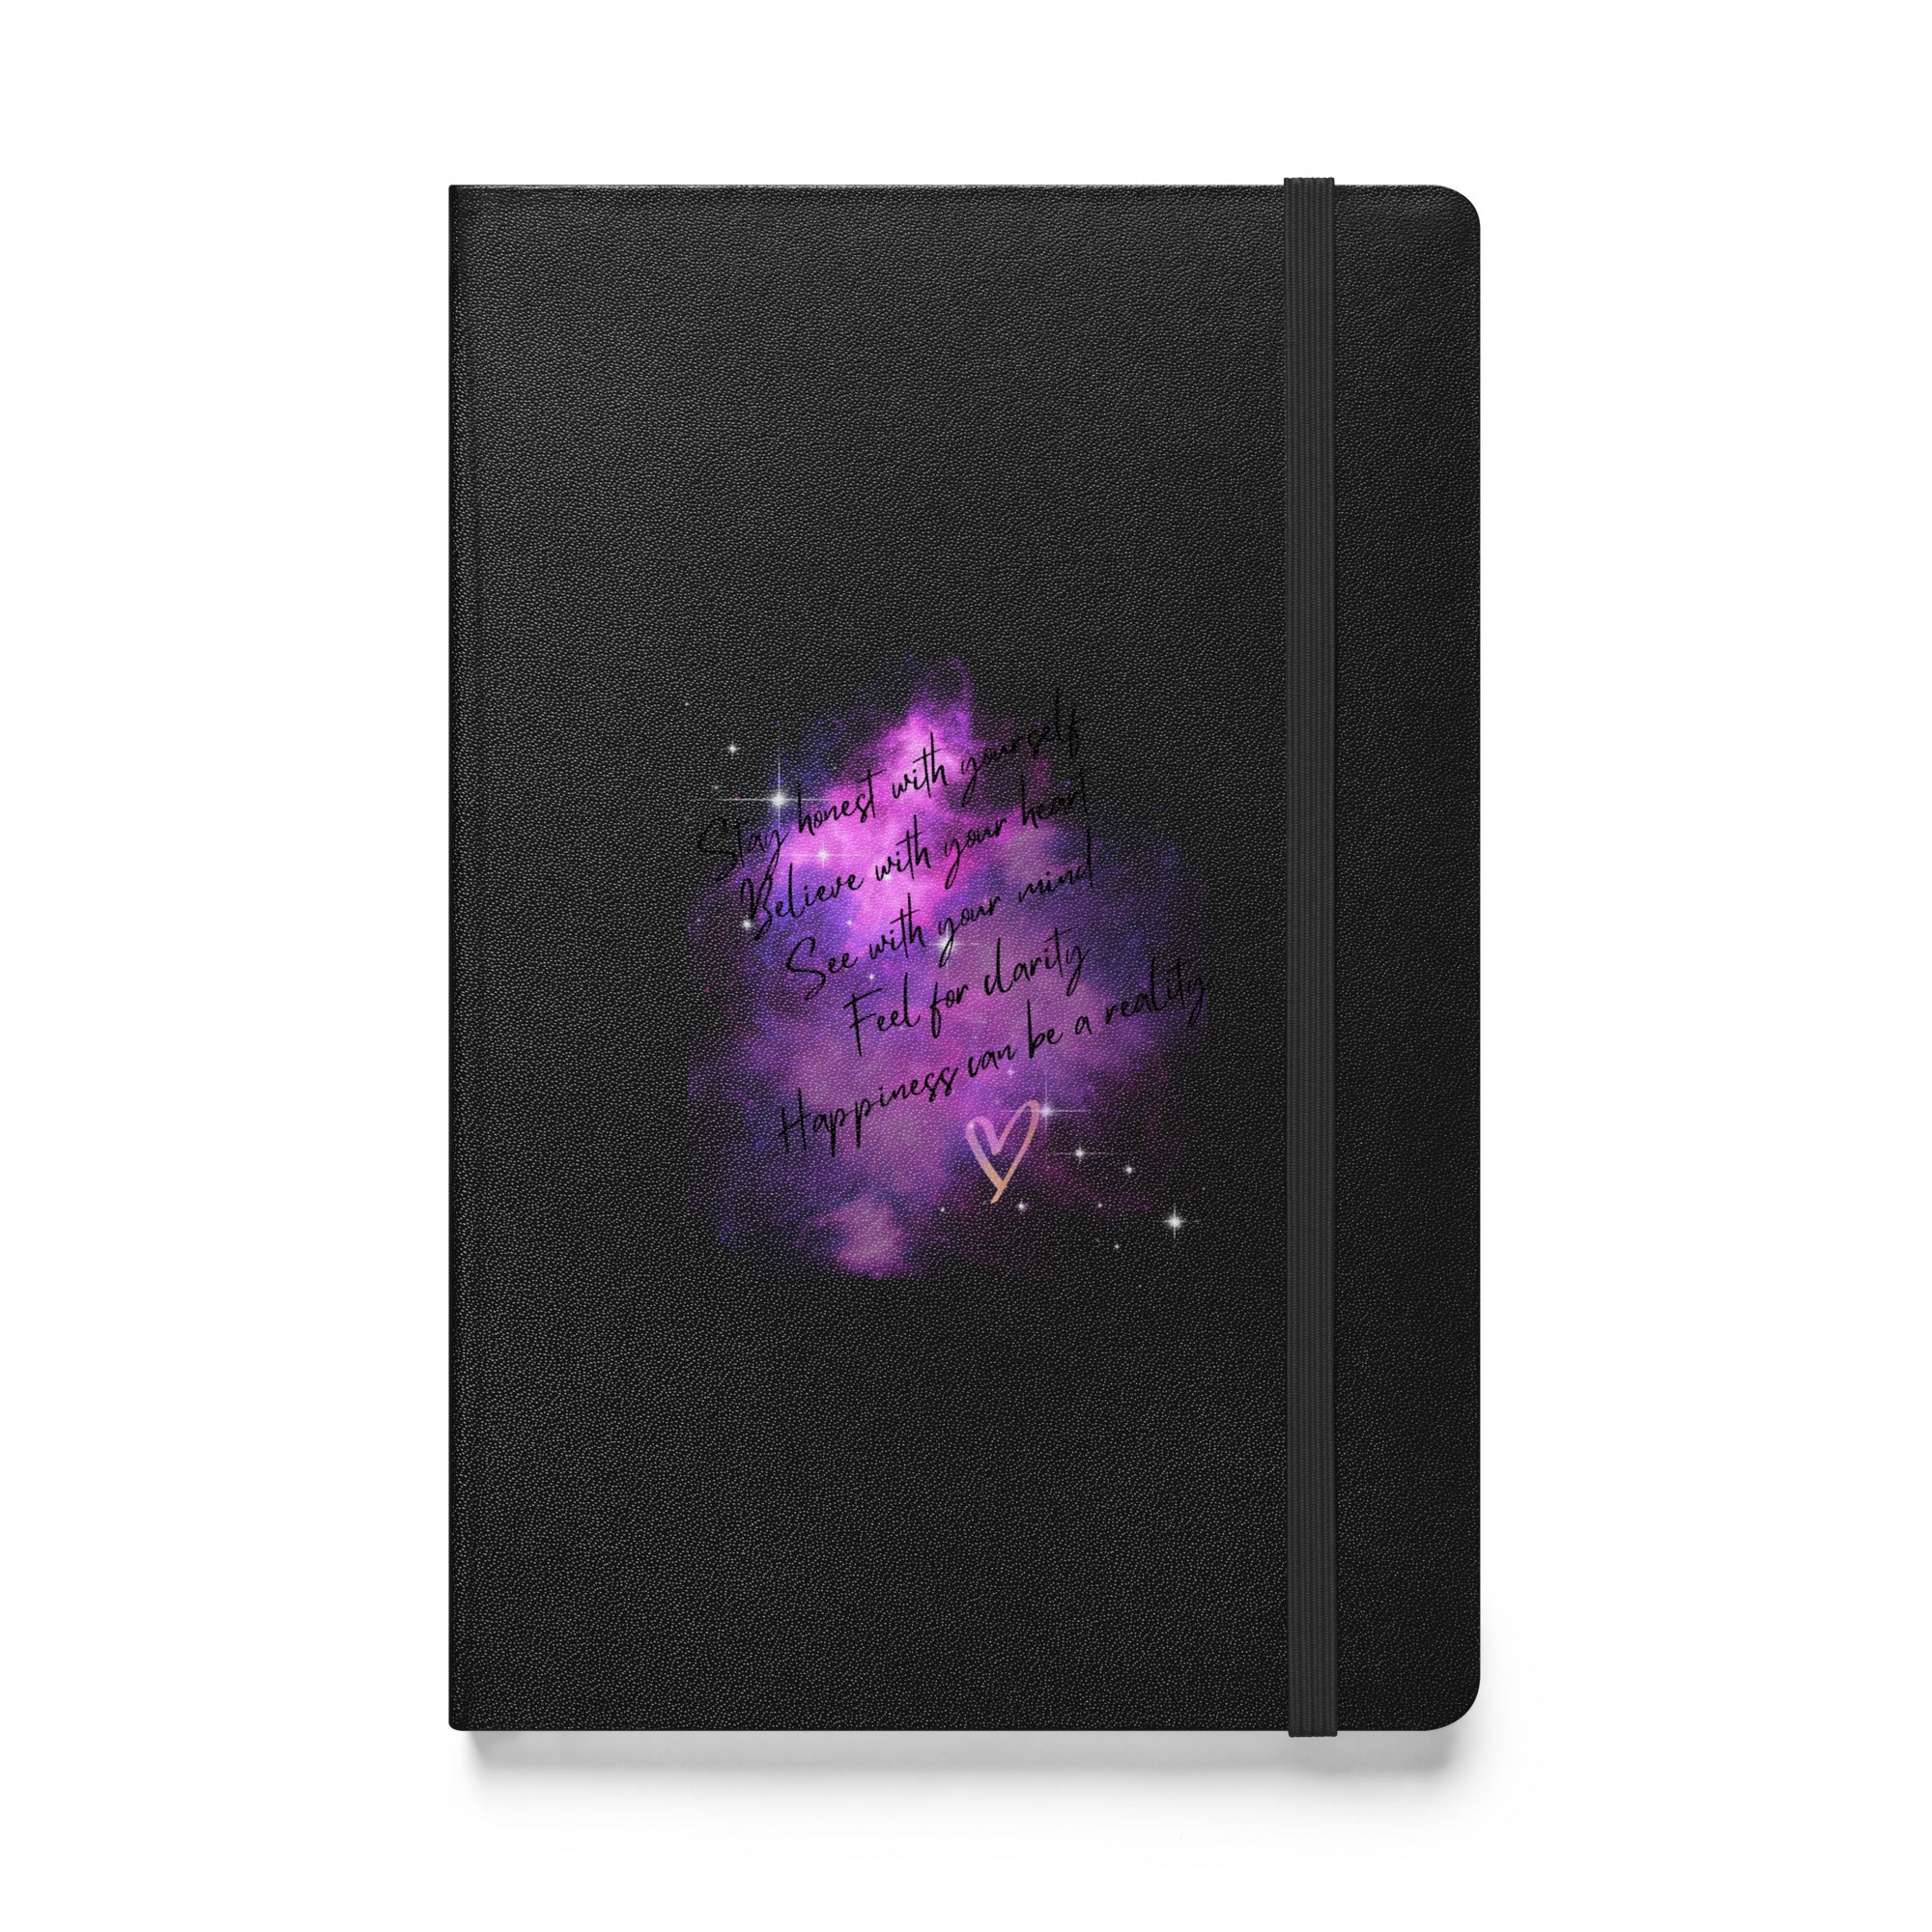 My Happiness Hardcover bound notebook